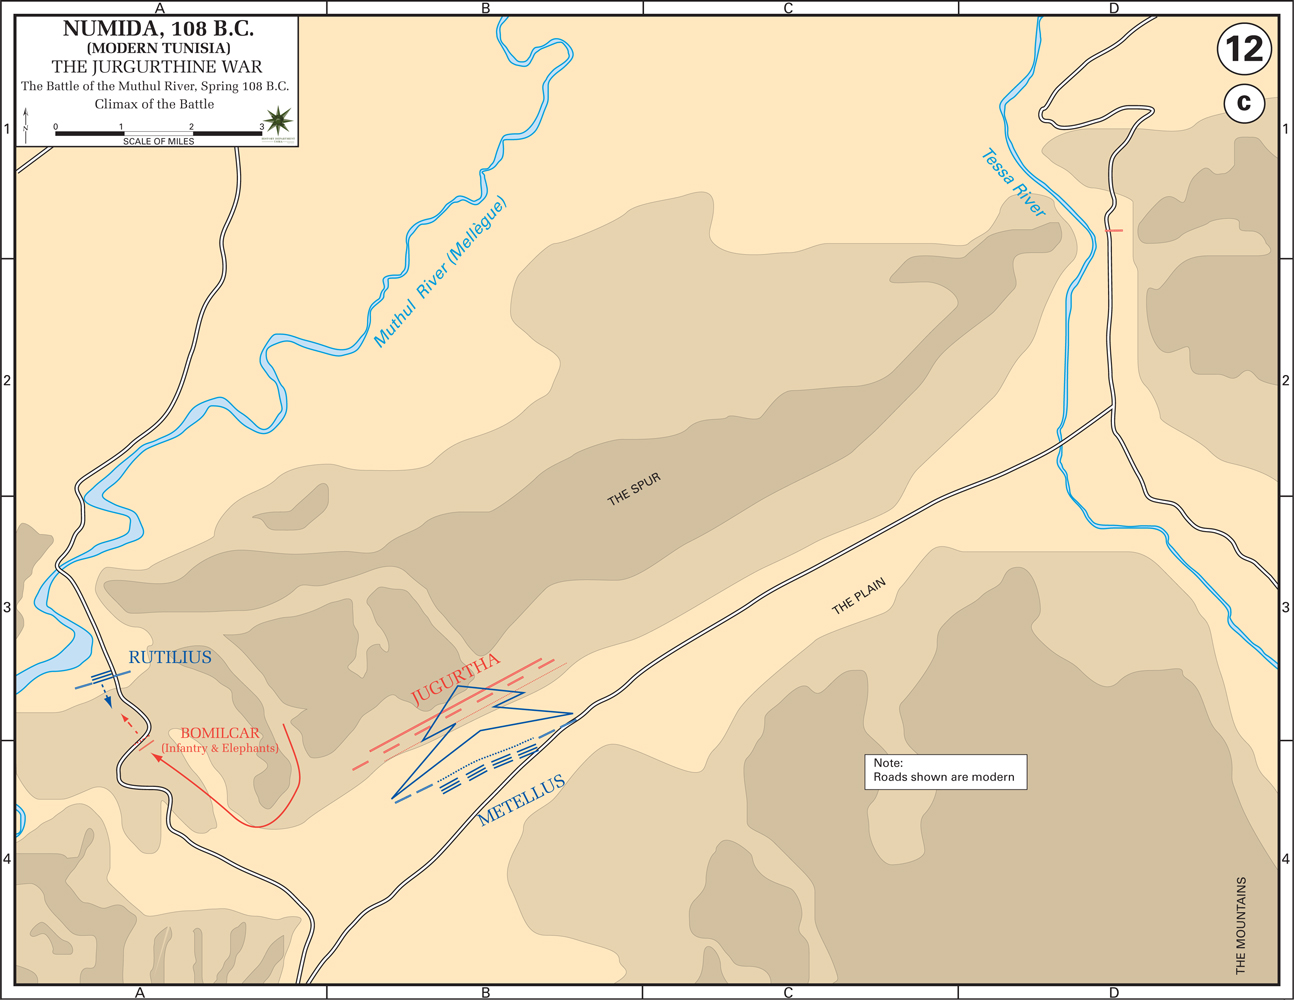 Map of Ancient Numidia: the Battle of the Muthul River, 108 BC - Climax of the Battle